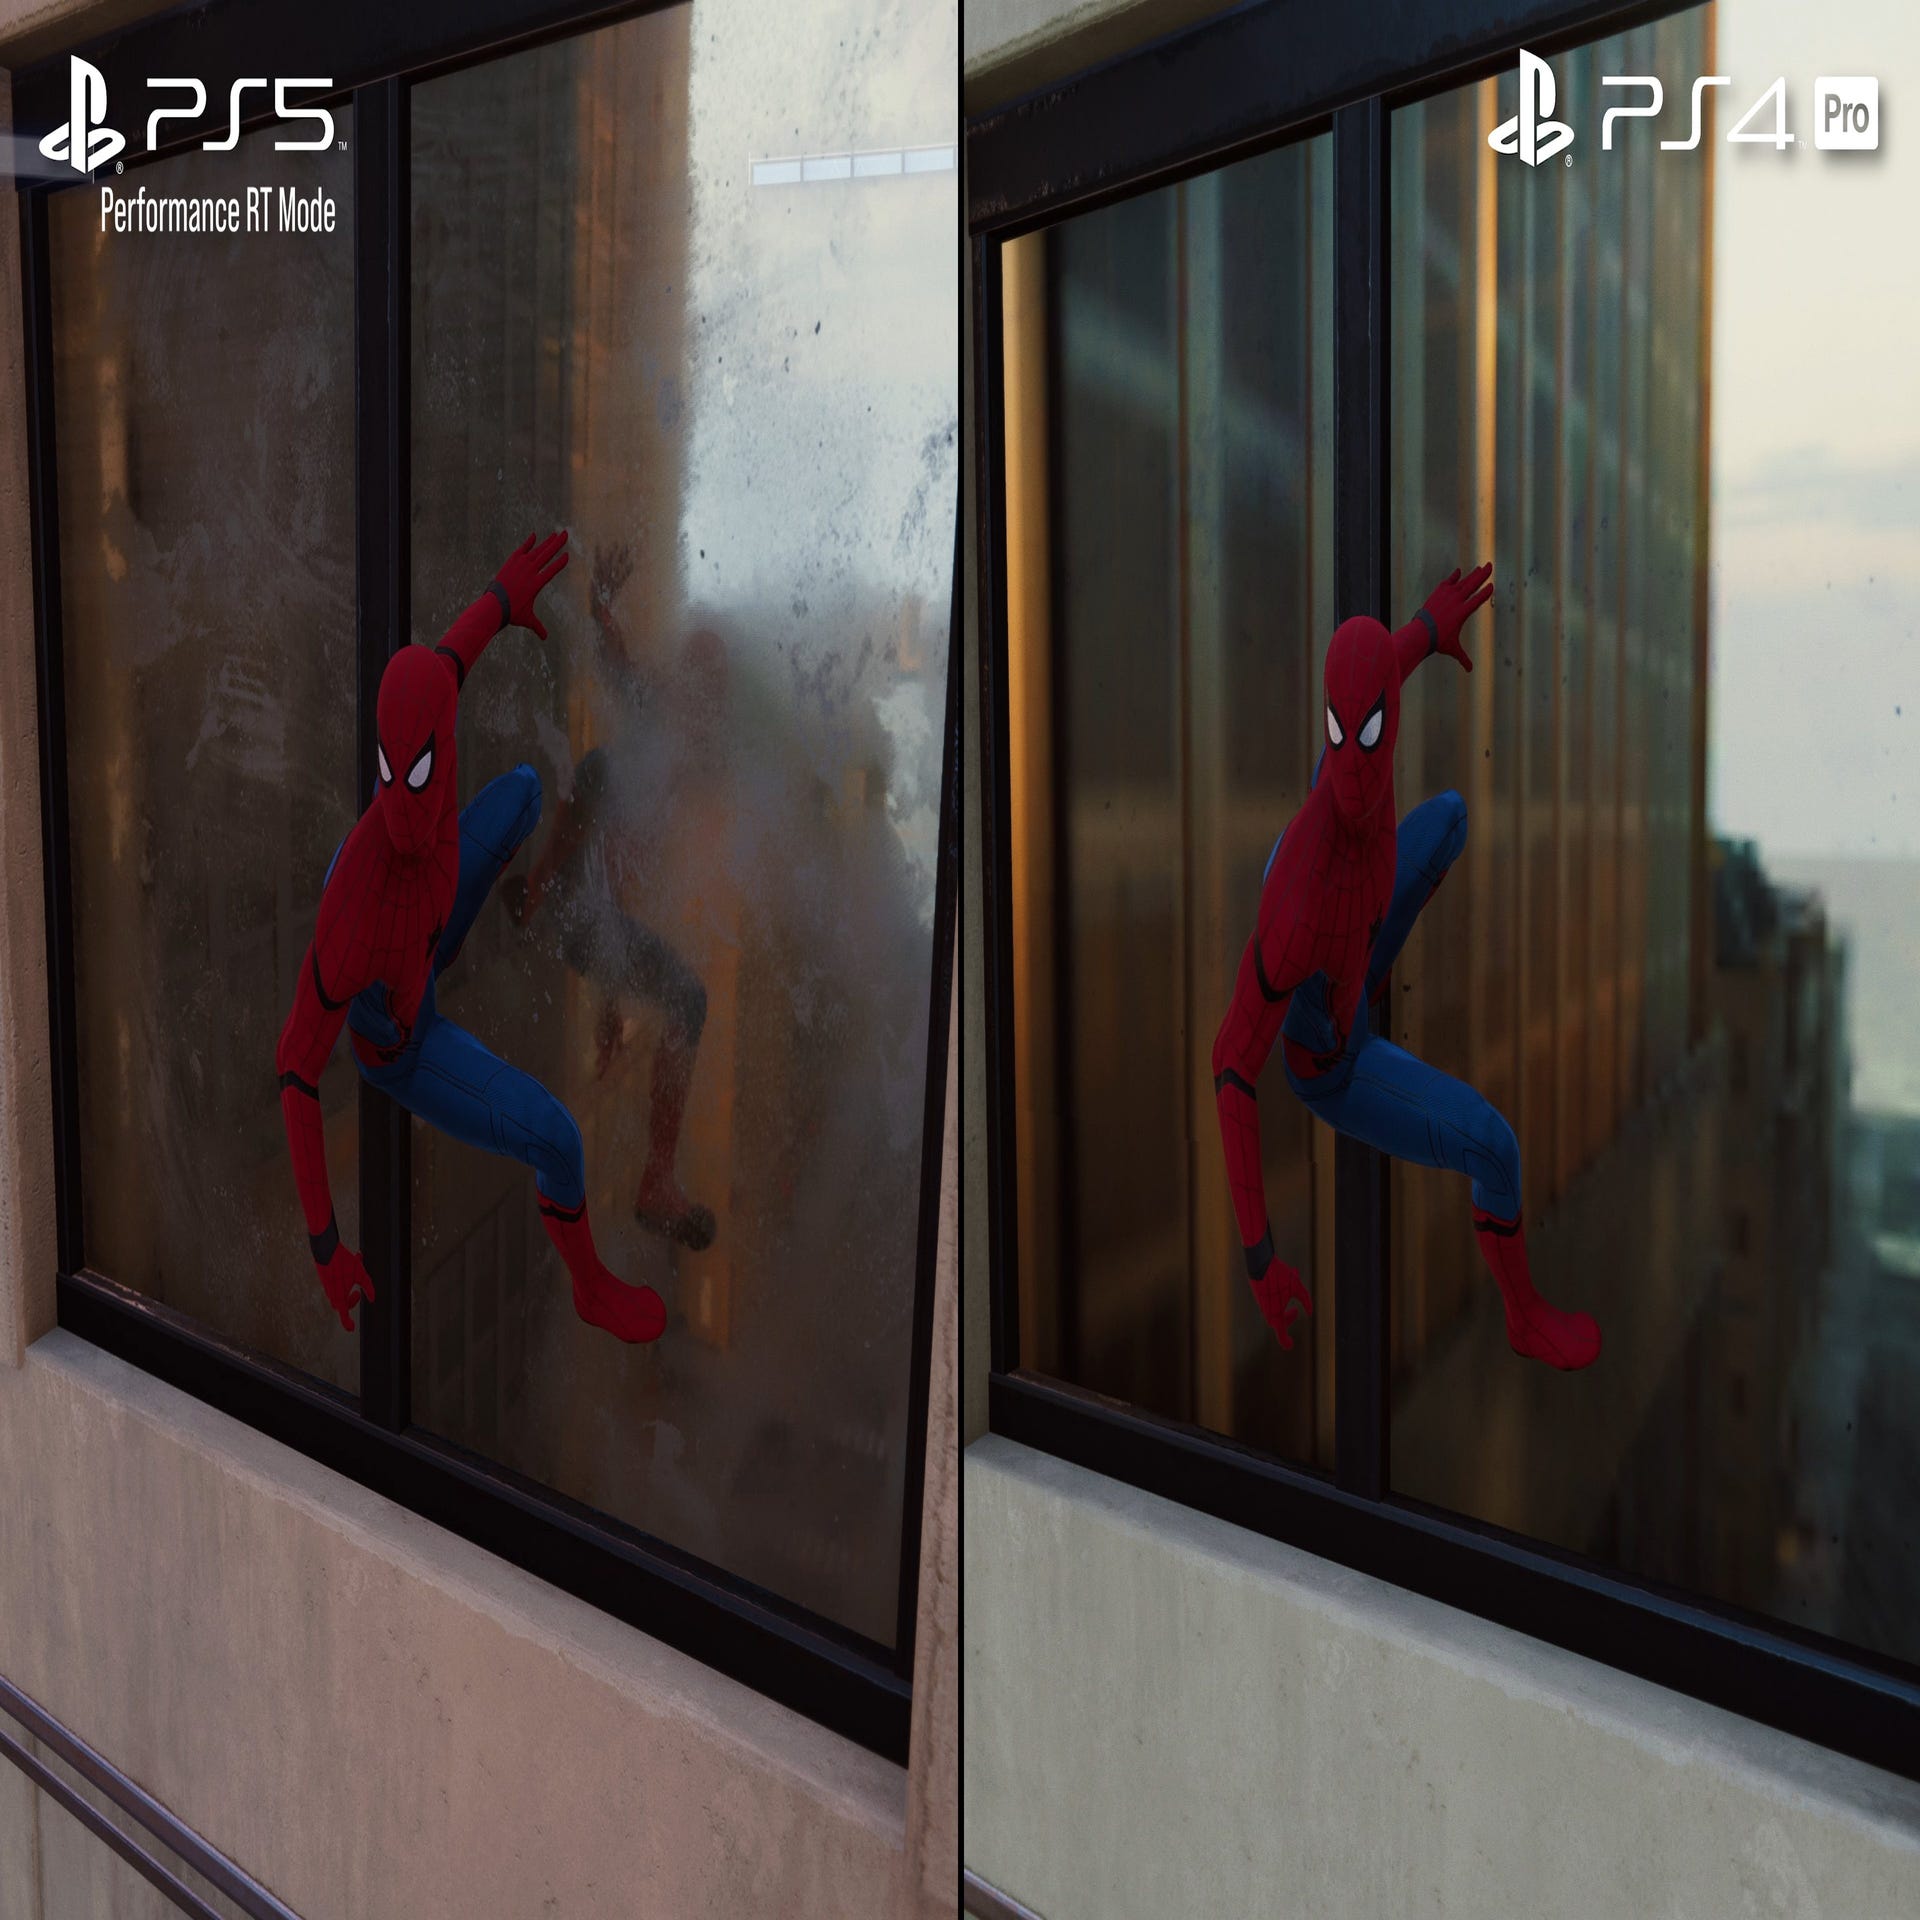 PlayStation 5 ray tracing and 60 fps grandstanding on Marvel's Spider-Man  Remastered convey what all the next-gen console fuss is about -   News